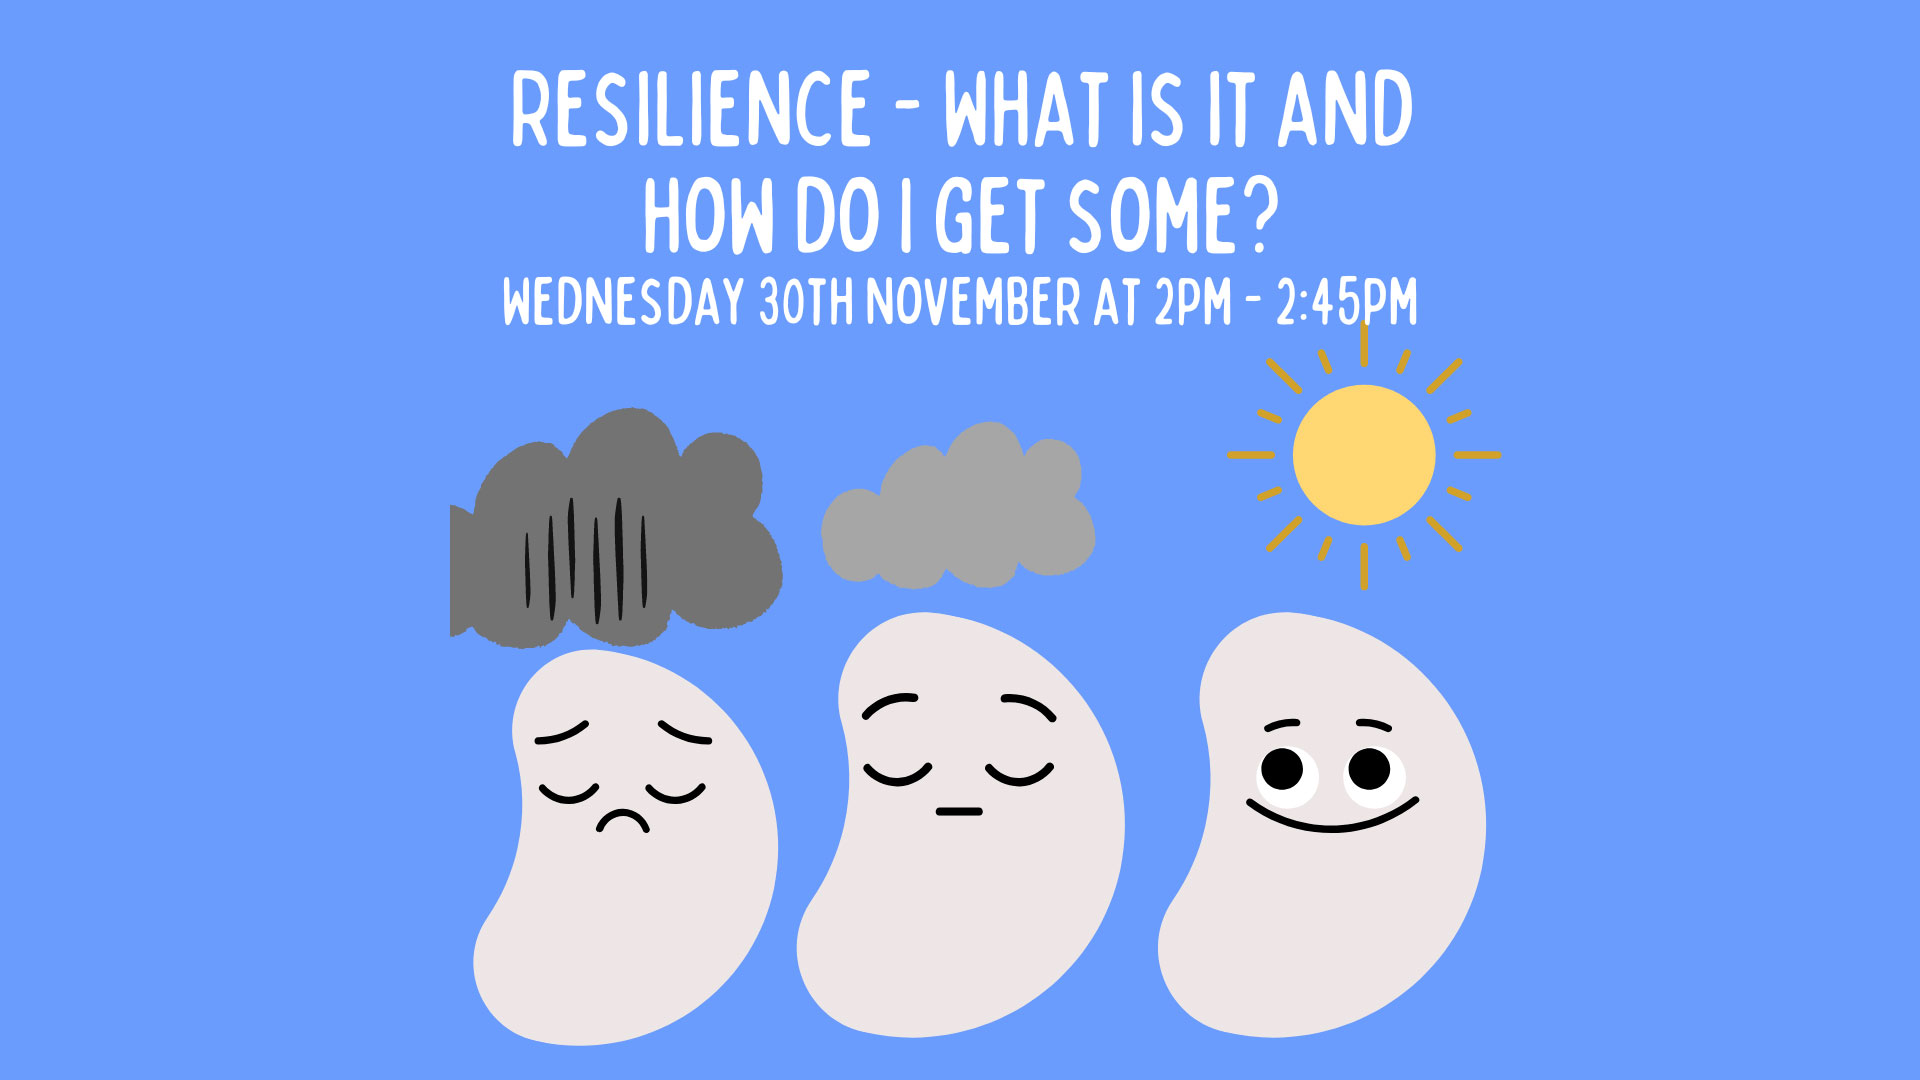 Resilience – what is it and how do I get some?